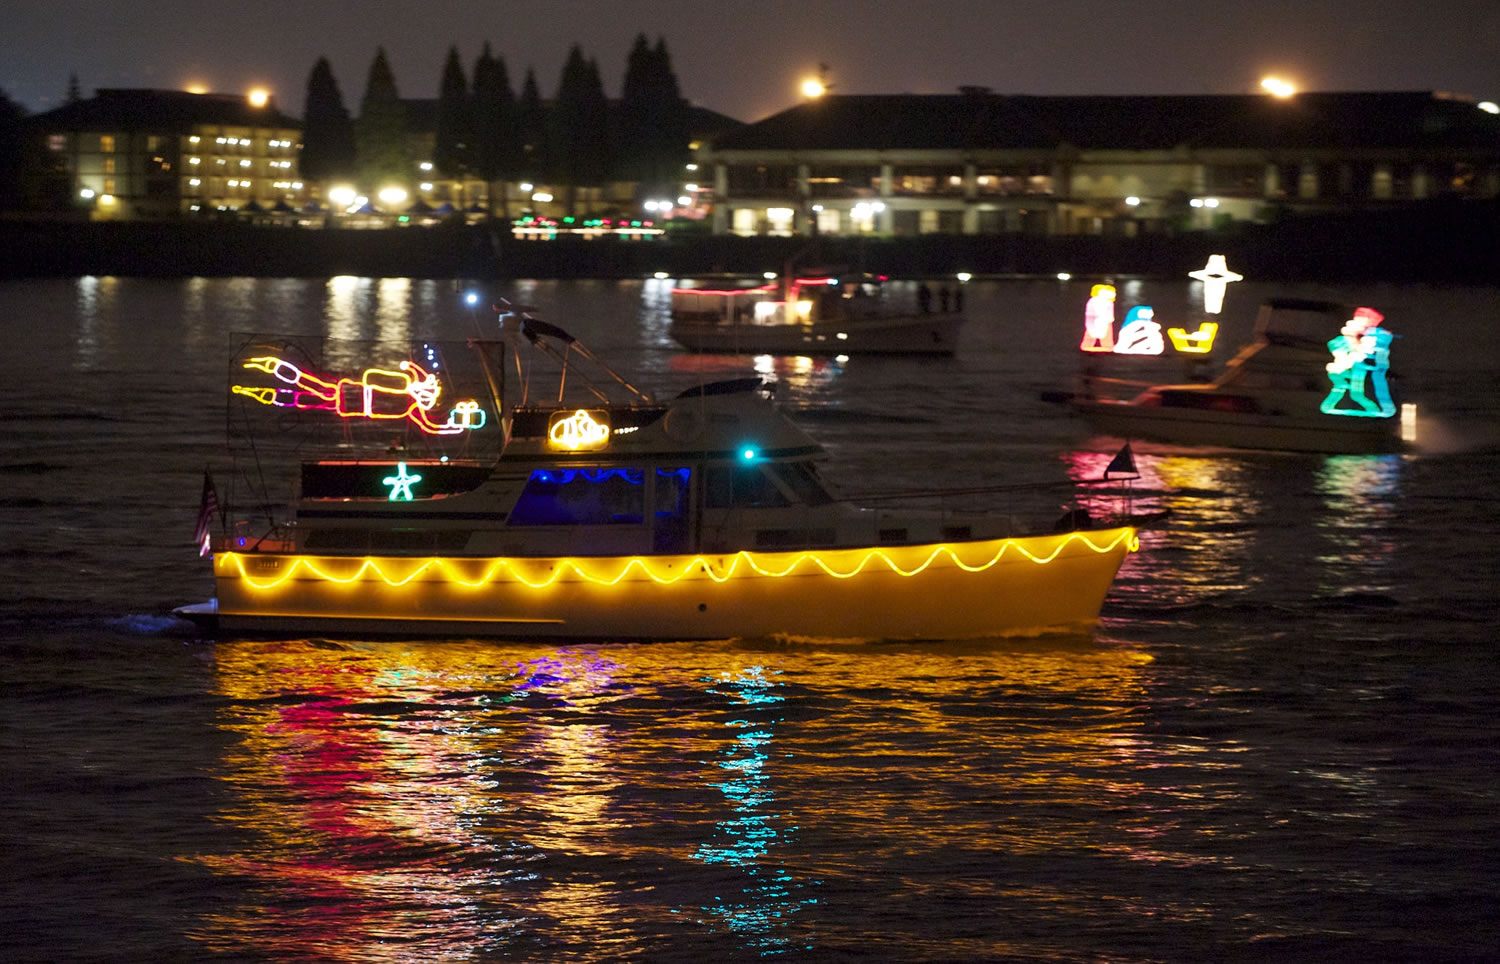 The fleet of Christmas ships will travel on the Columbia River near the I-5 Bridge during the Dec. 16 parade.